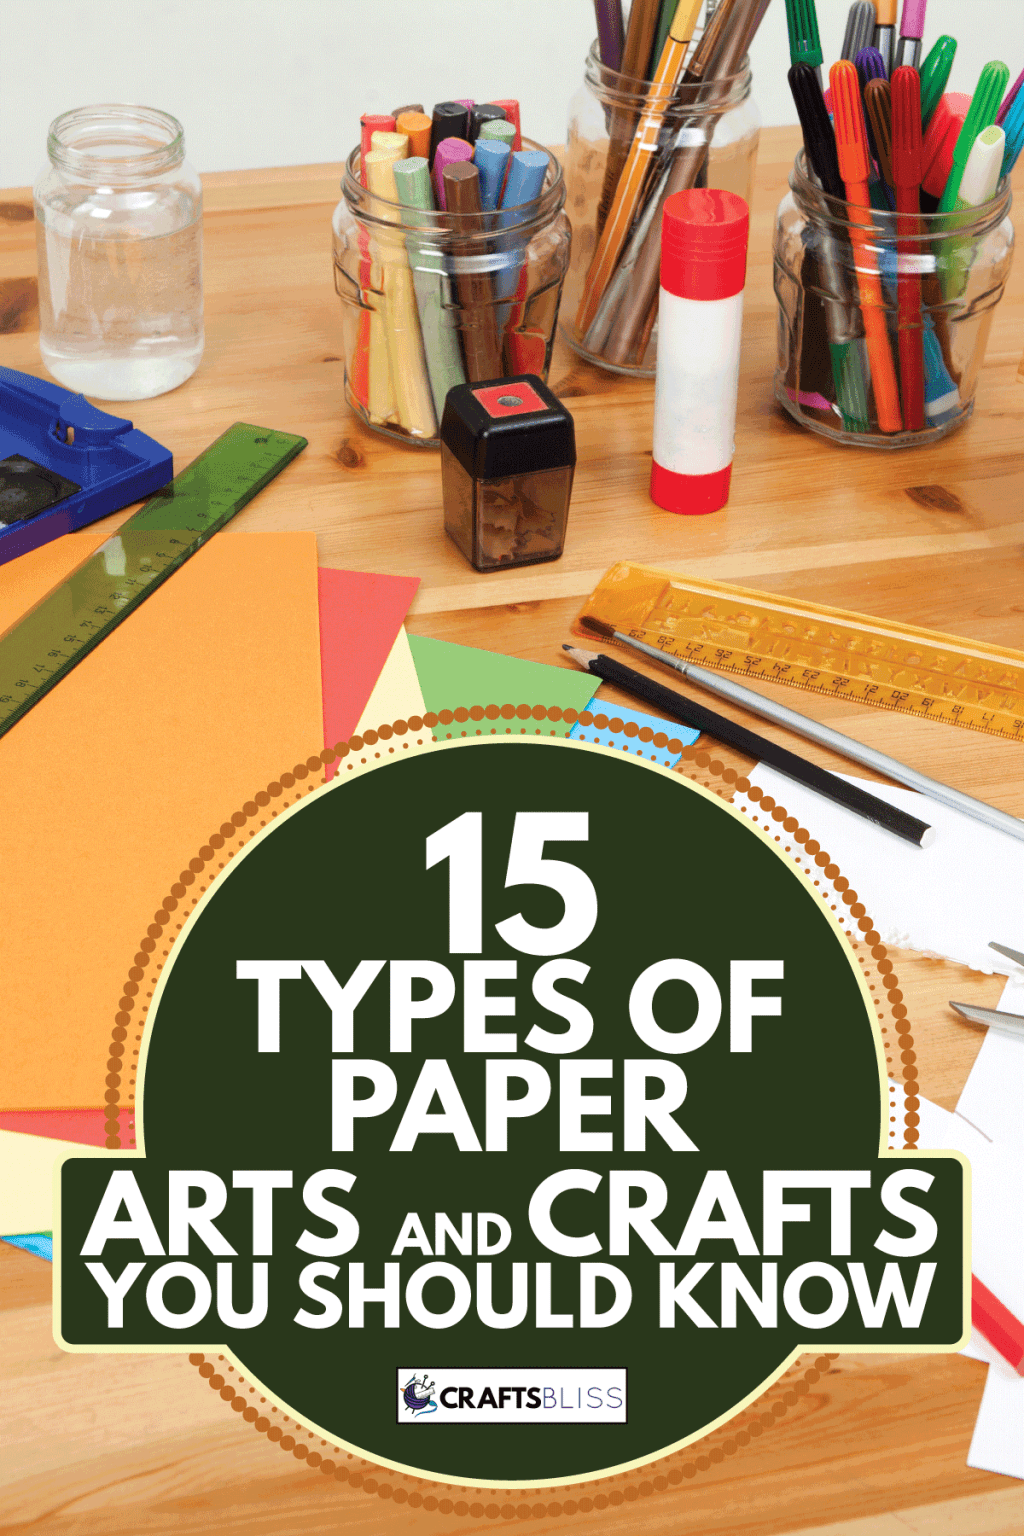 15 Types Of Paper Arts And Crafts You Should Know – CraftsBliss.com